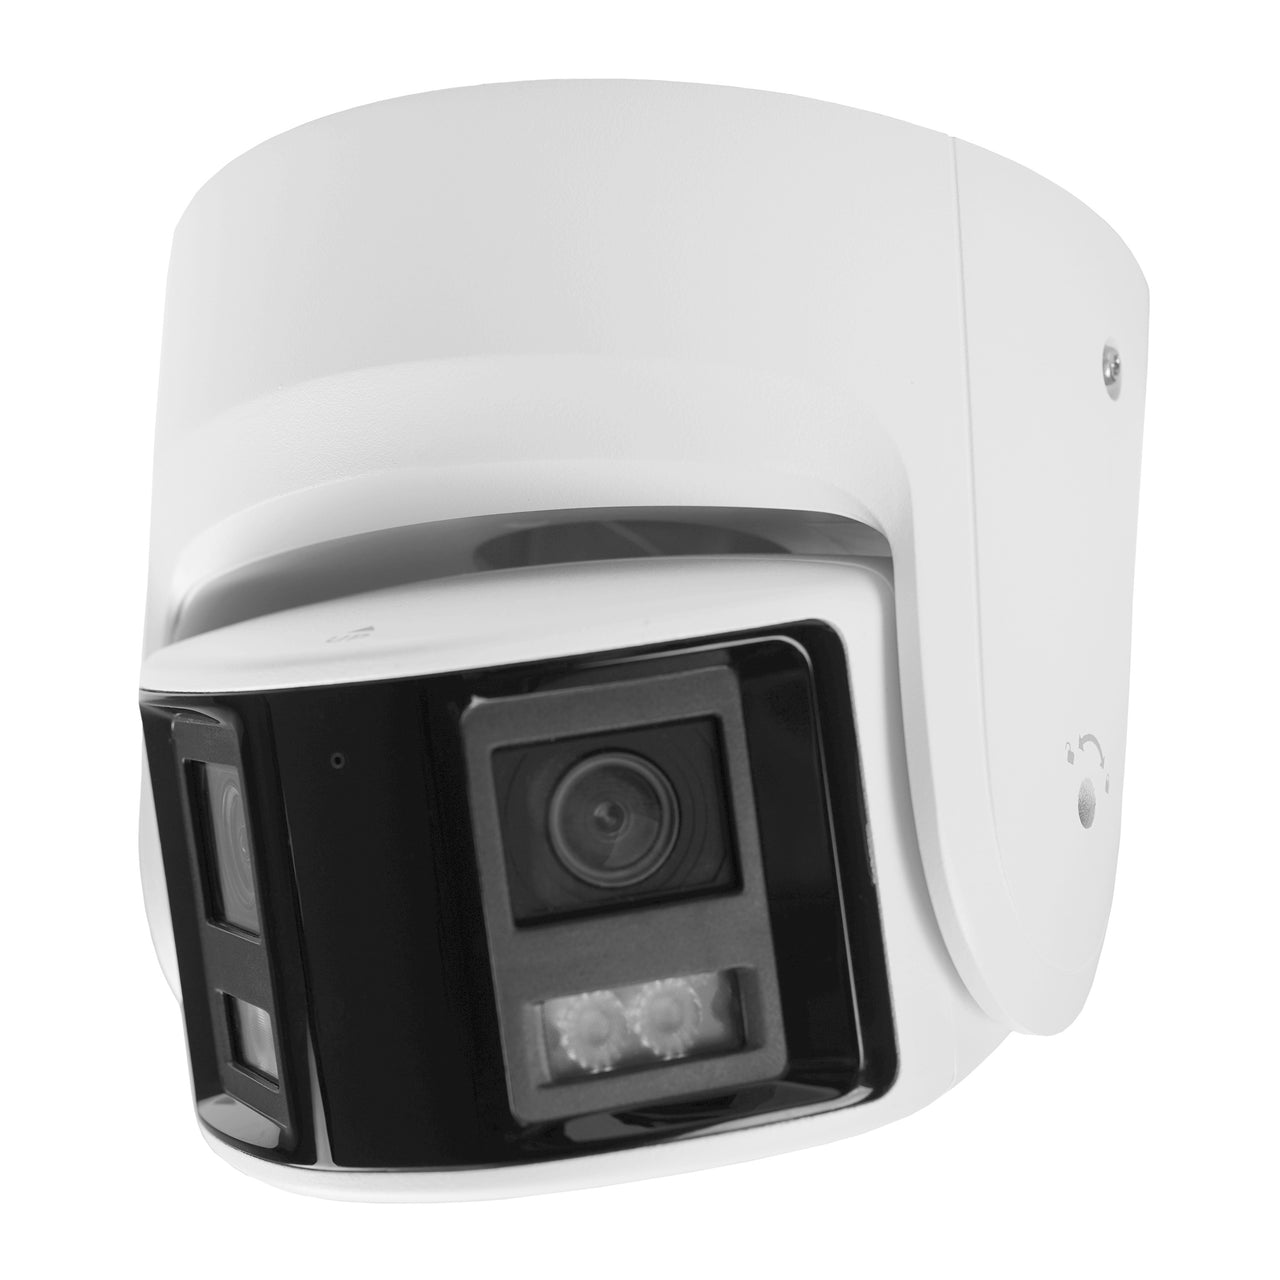 A second front view of the IP dome camera.